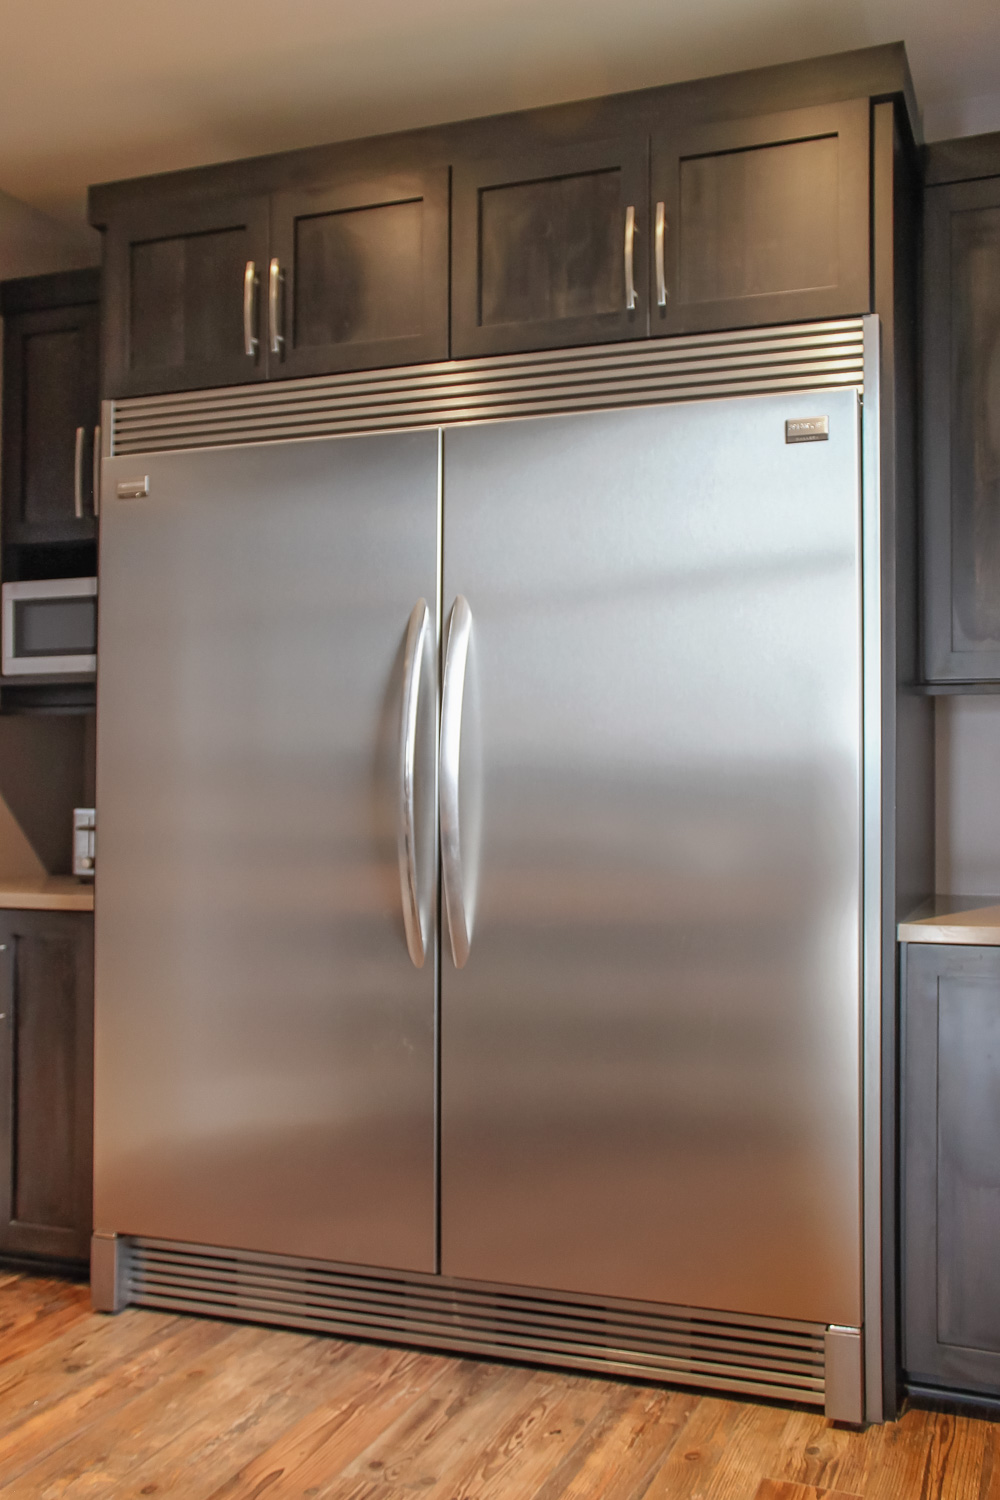 All About Counter Depth Refrigerators